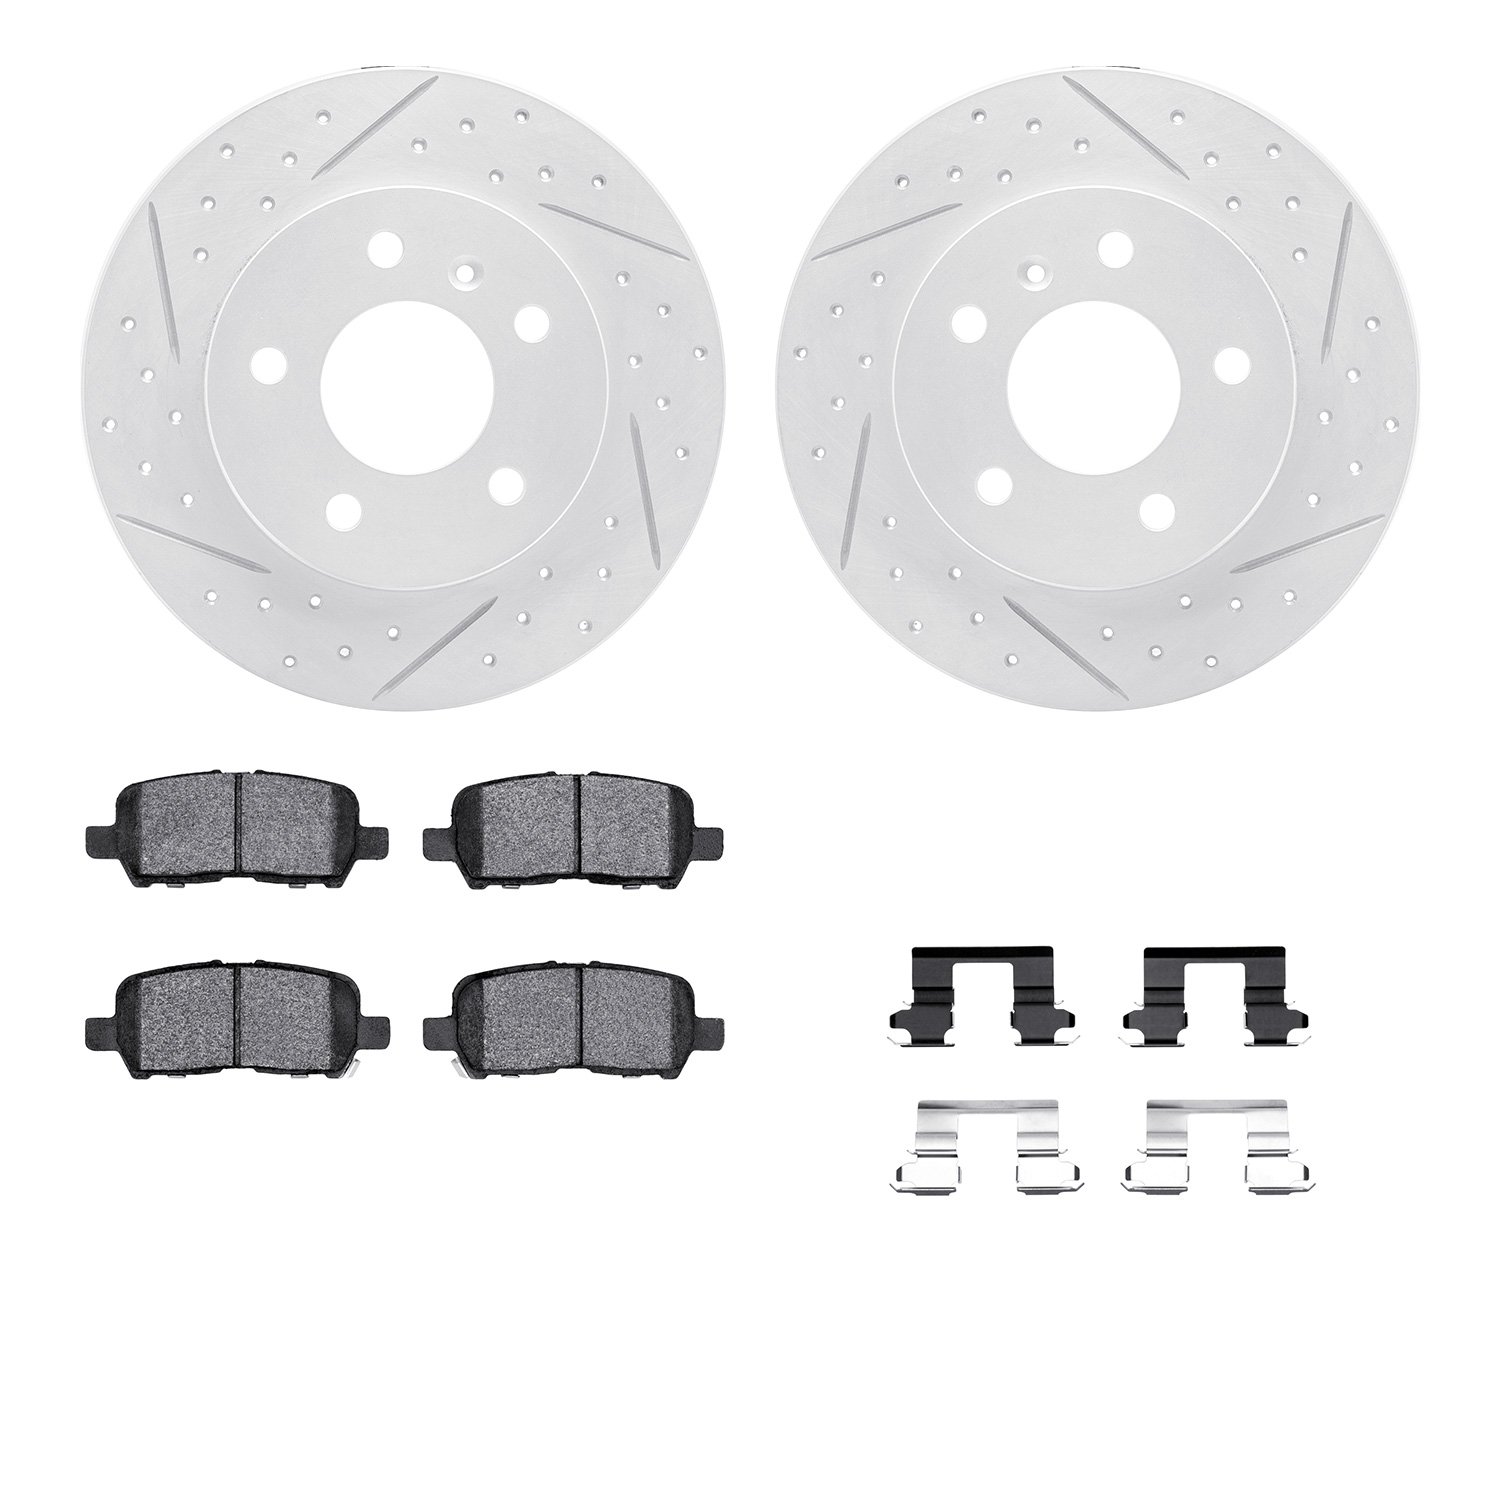 2512-47021 Geoperformance Drilled/Slotted Rotors w/5000 Advanced Brake Pads Kit & Hardware, 2004-2016 GM, Position: Rear